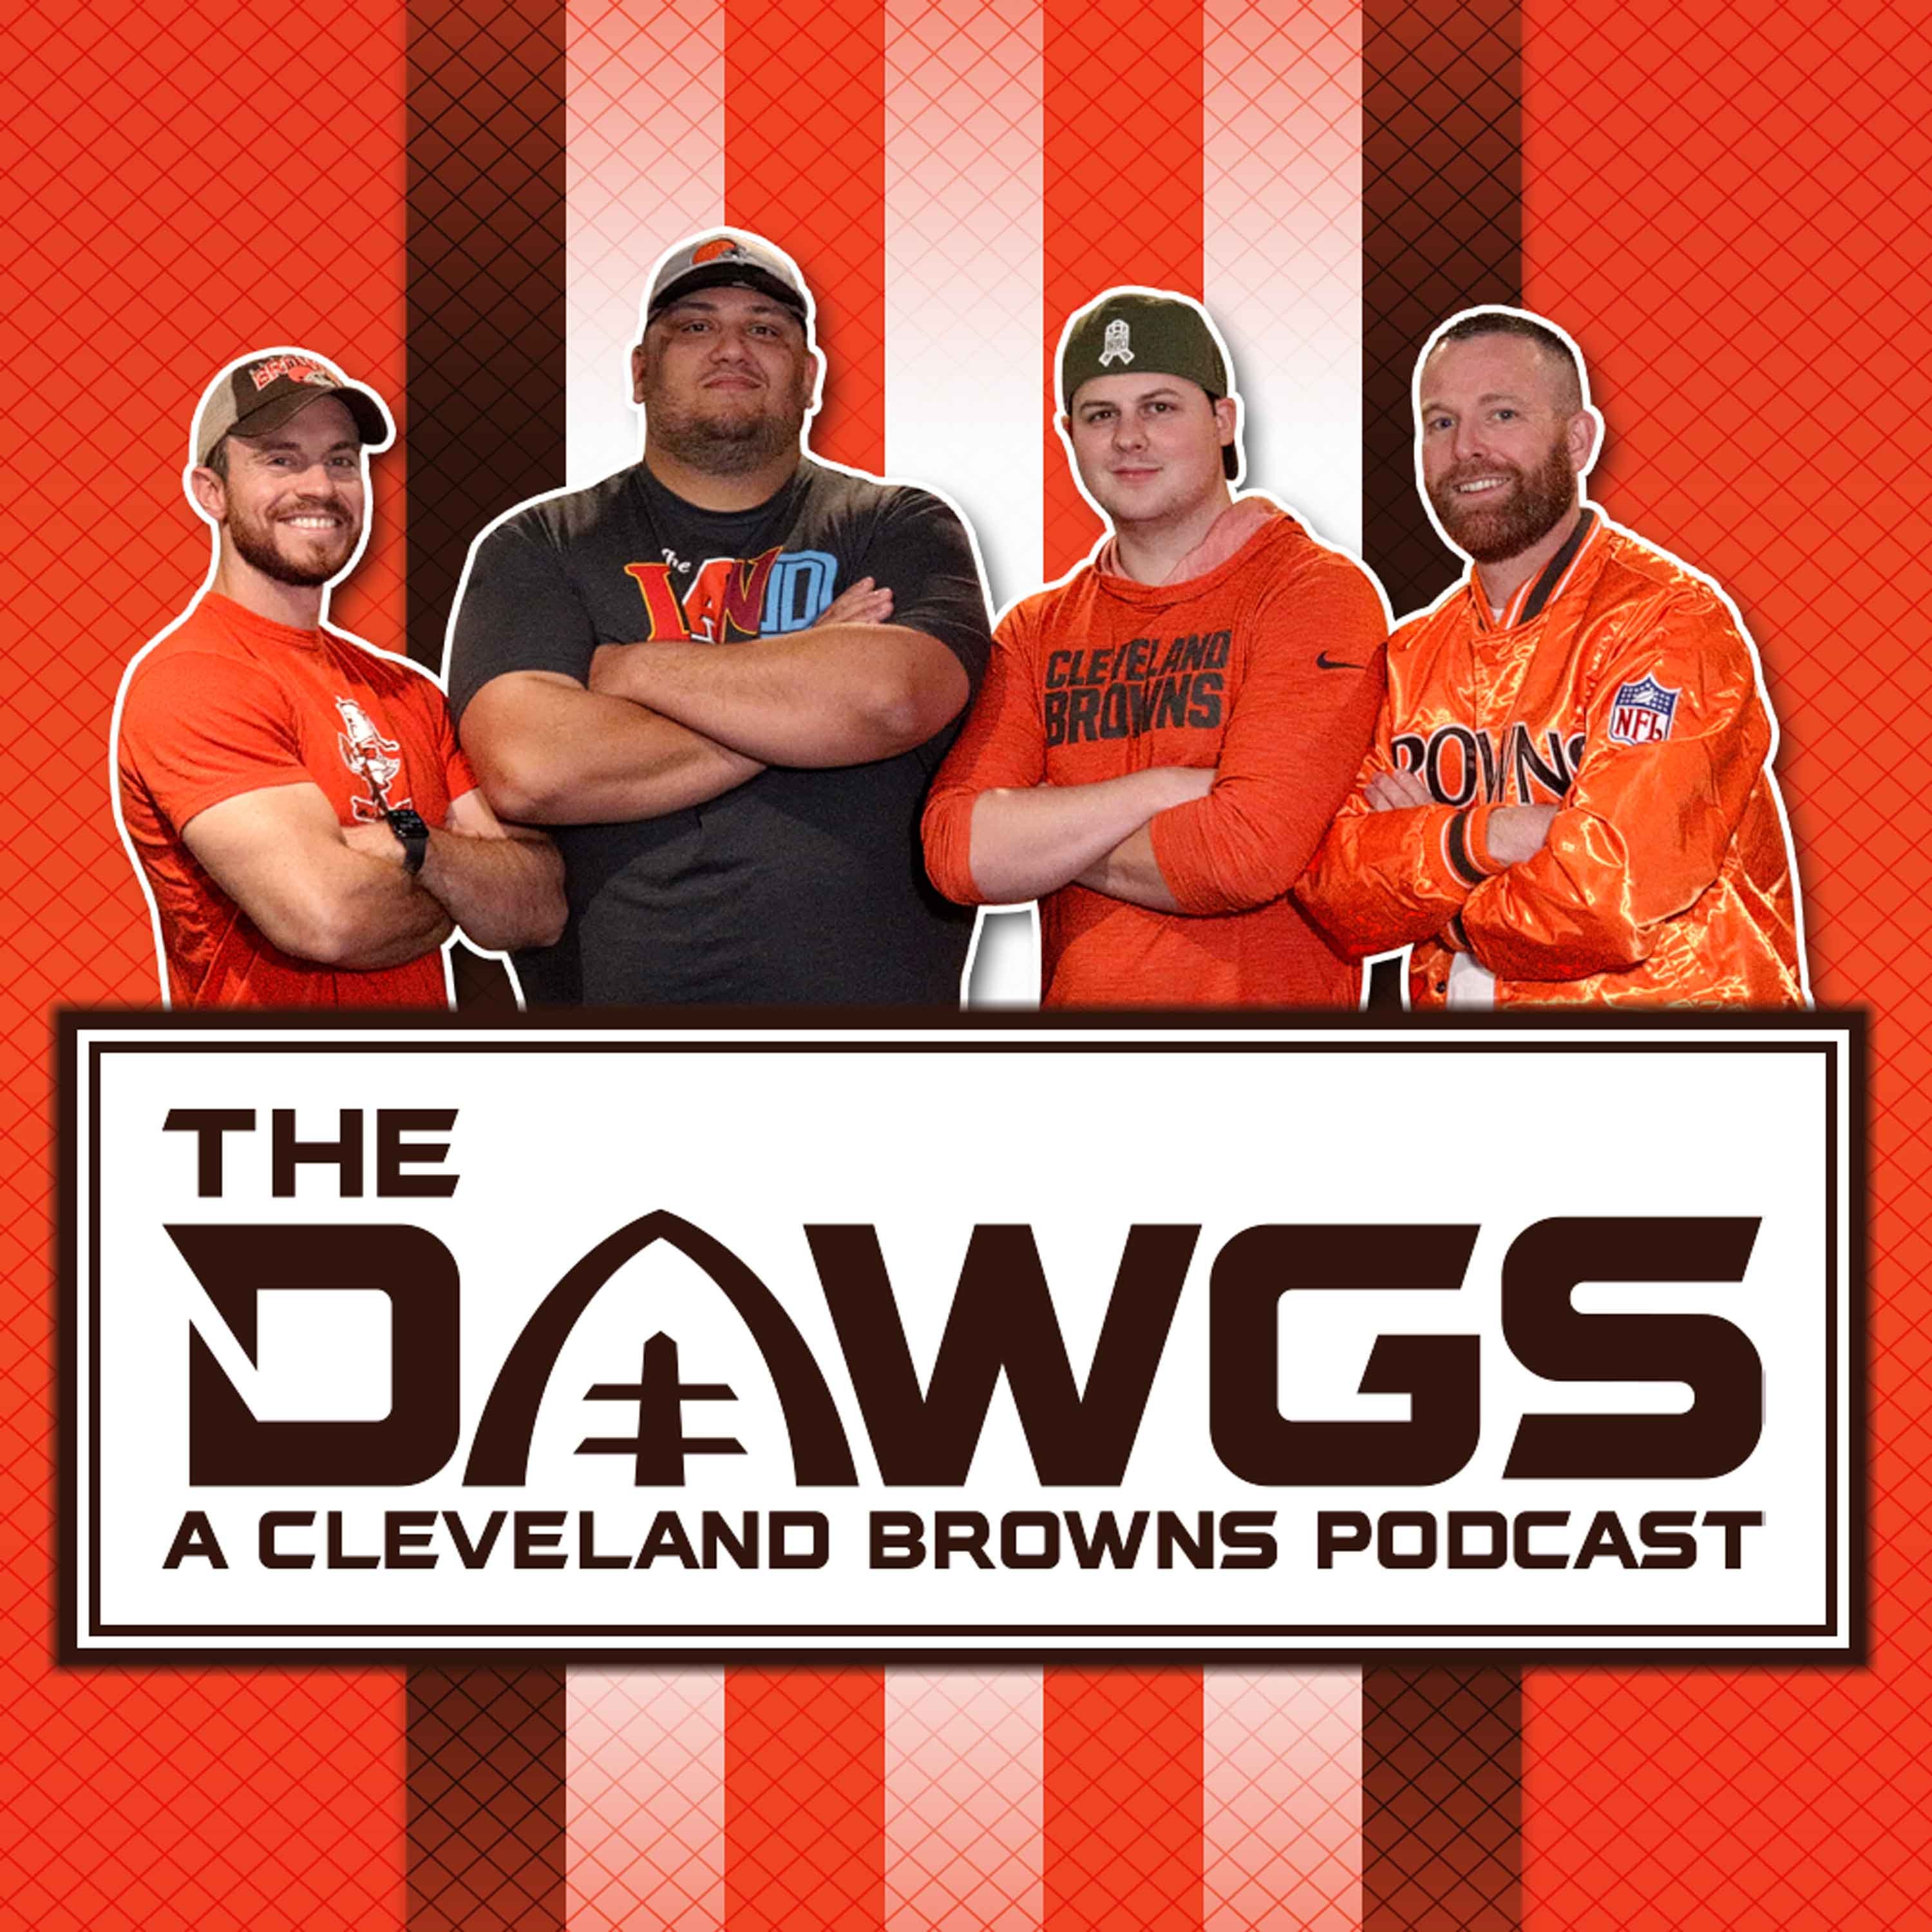 The Dawgs – A Cleveland Browns Podcast